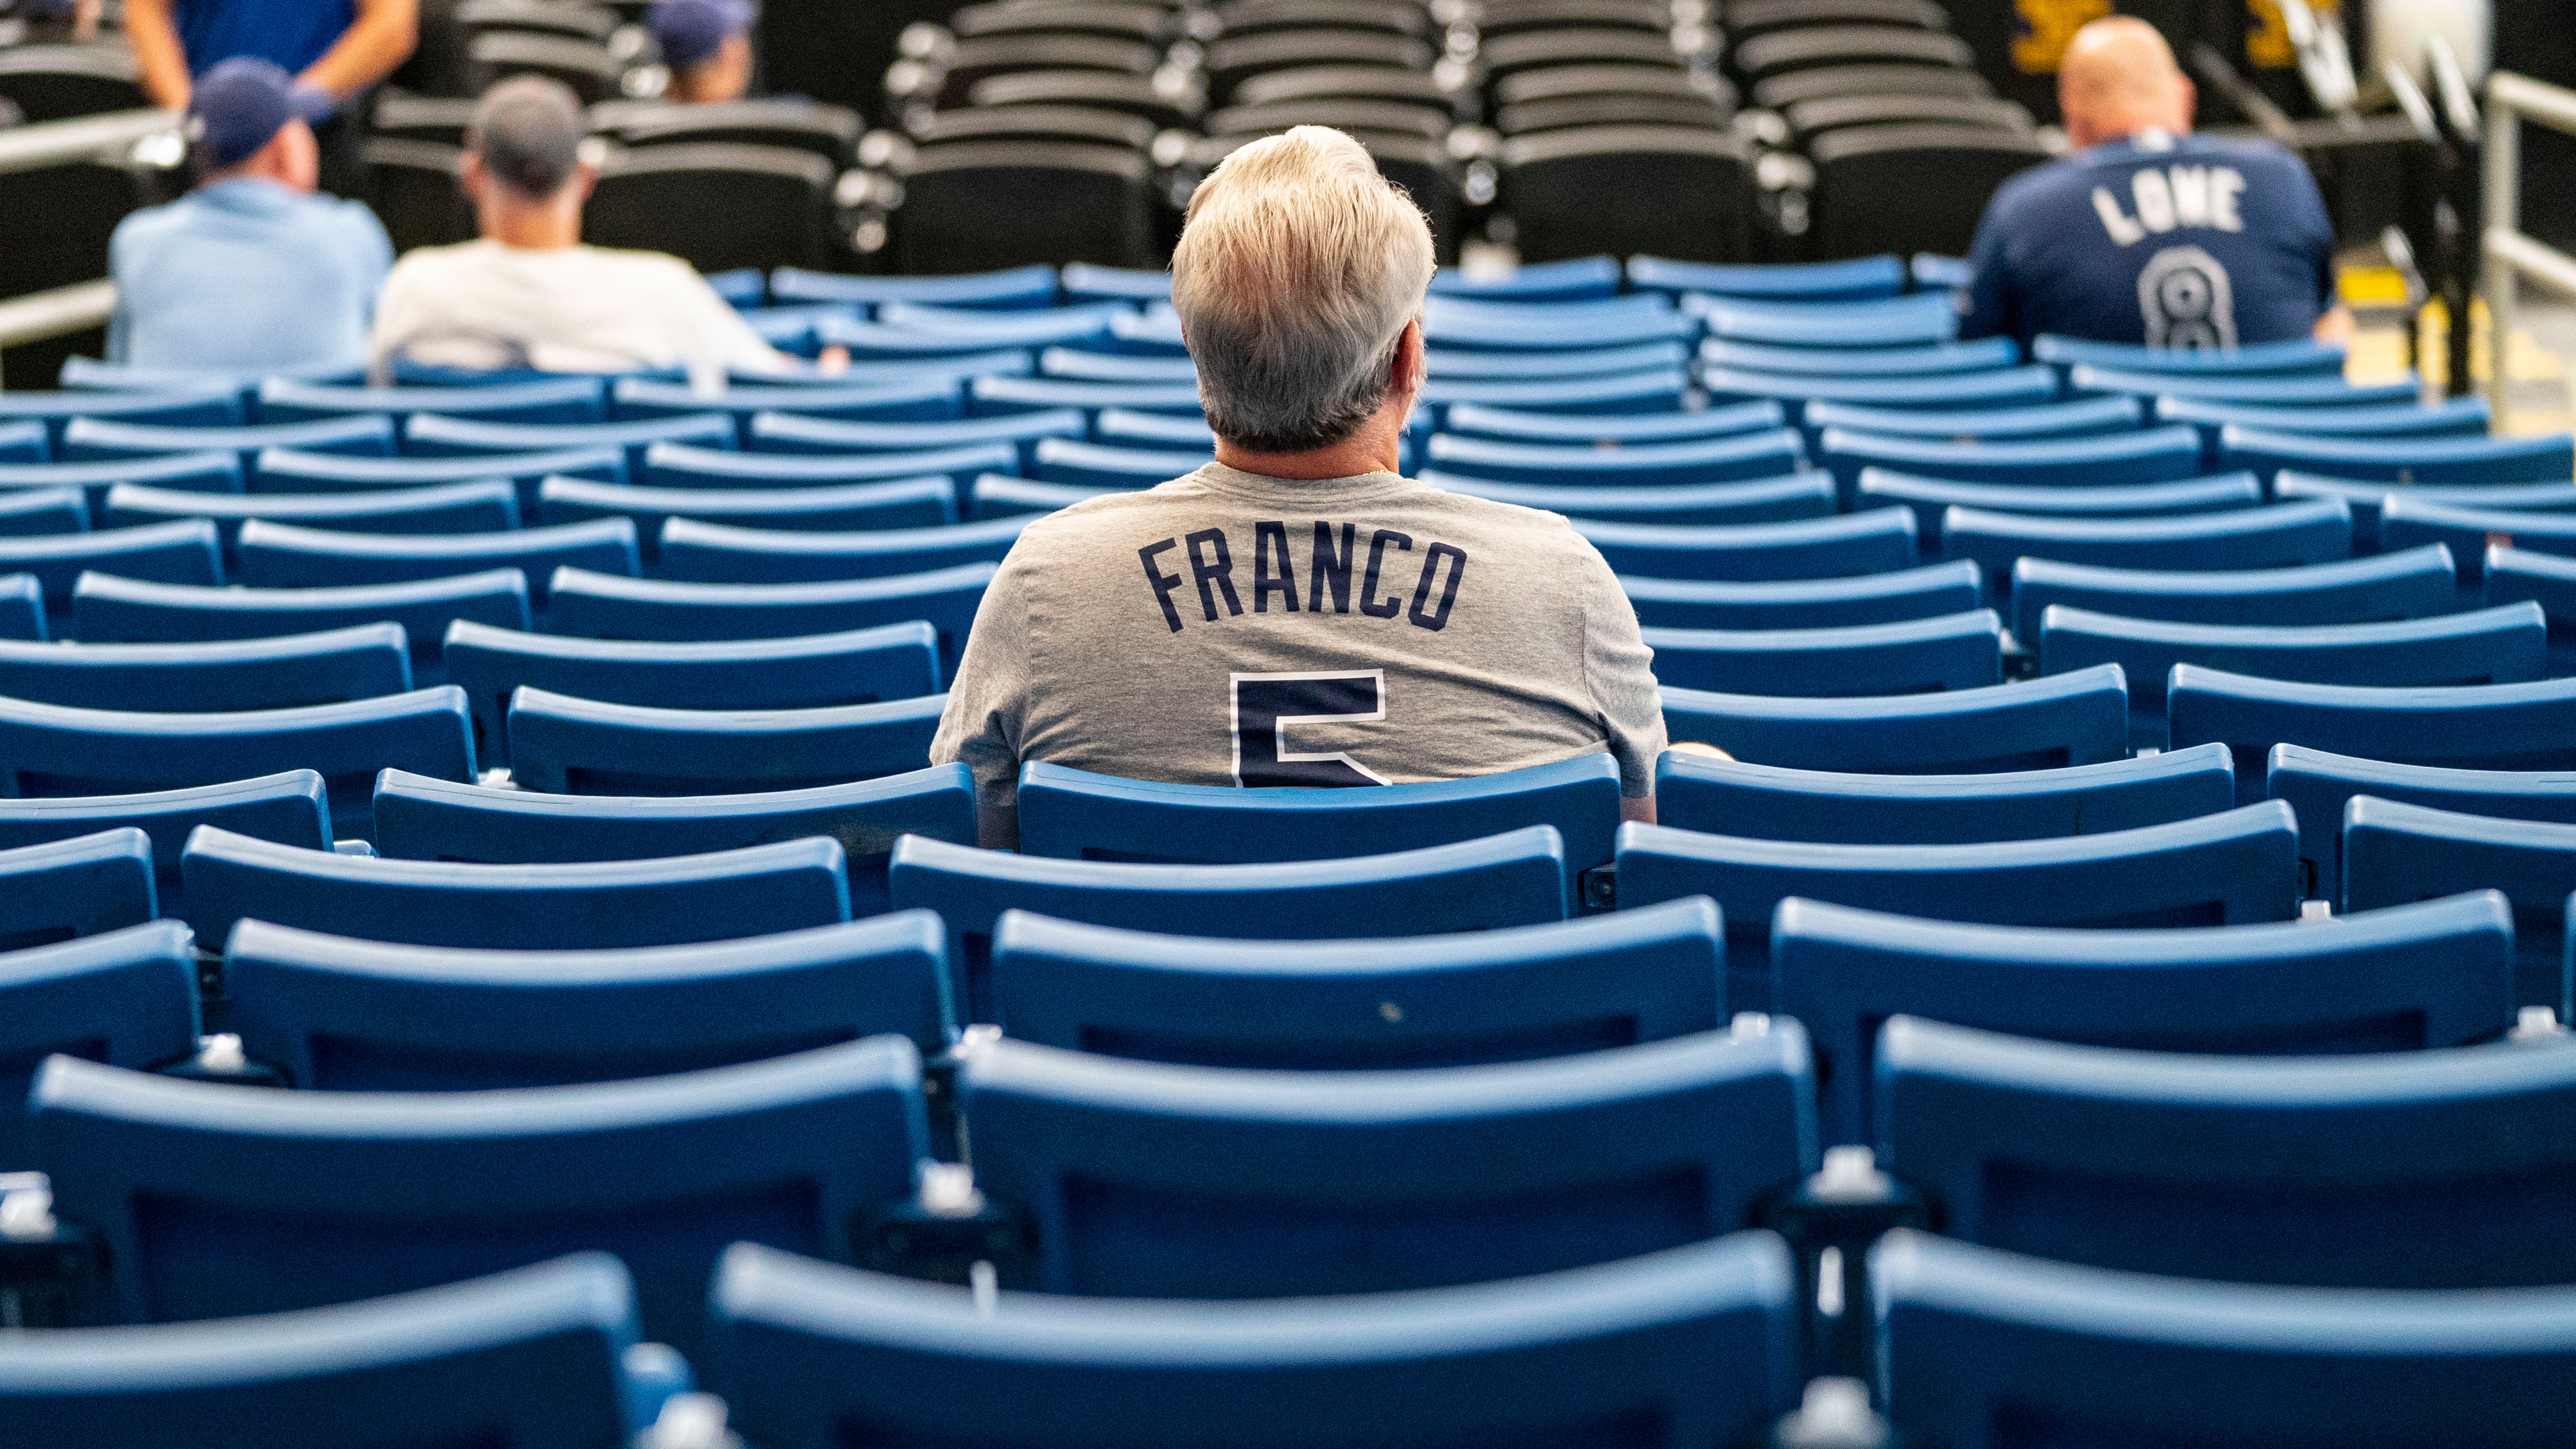 Wander Franco Tampa Bay Rays Two hands Franco only needs Wan shirt